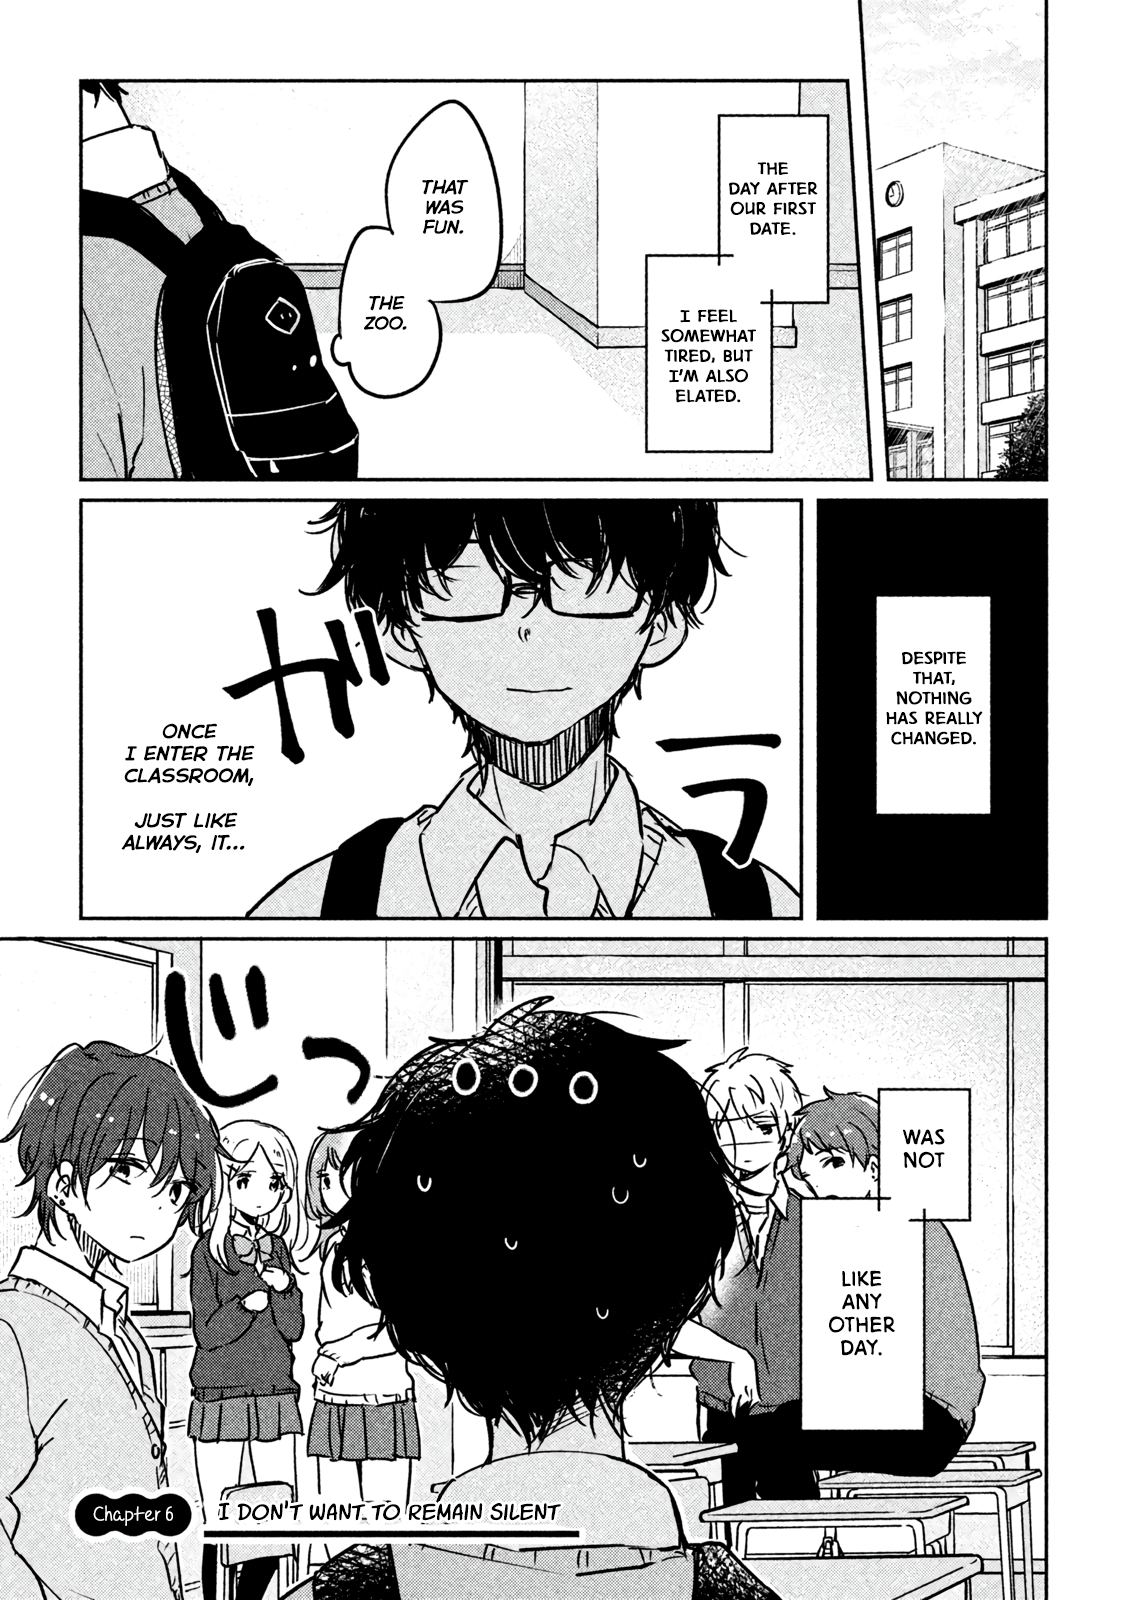 It's Not Meguro-San's First Time - Page 1